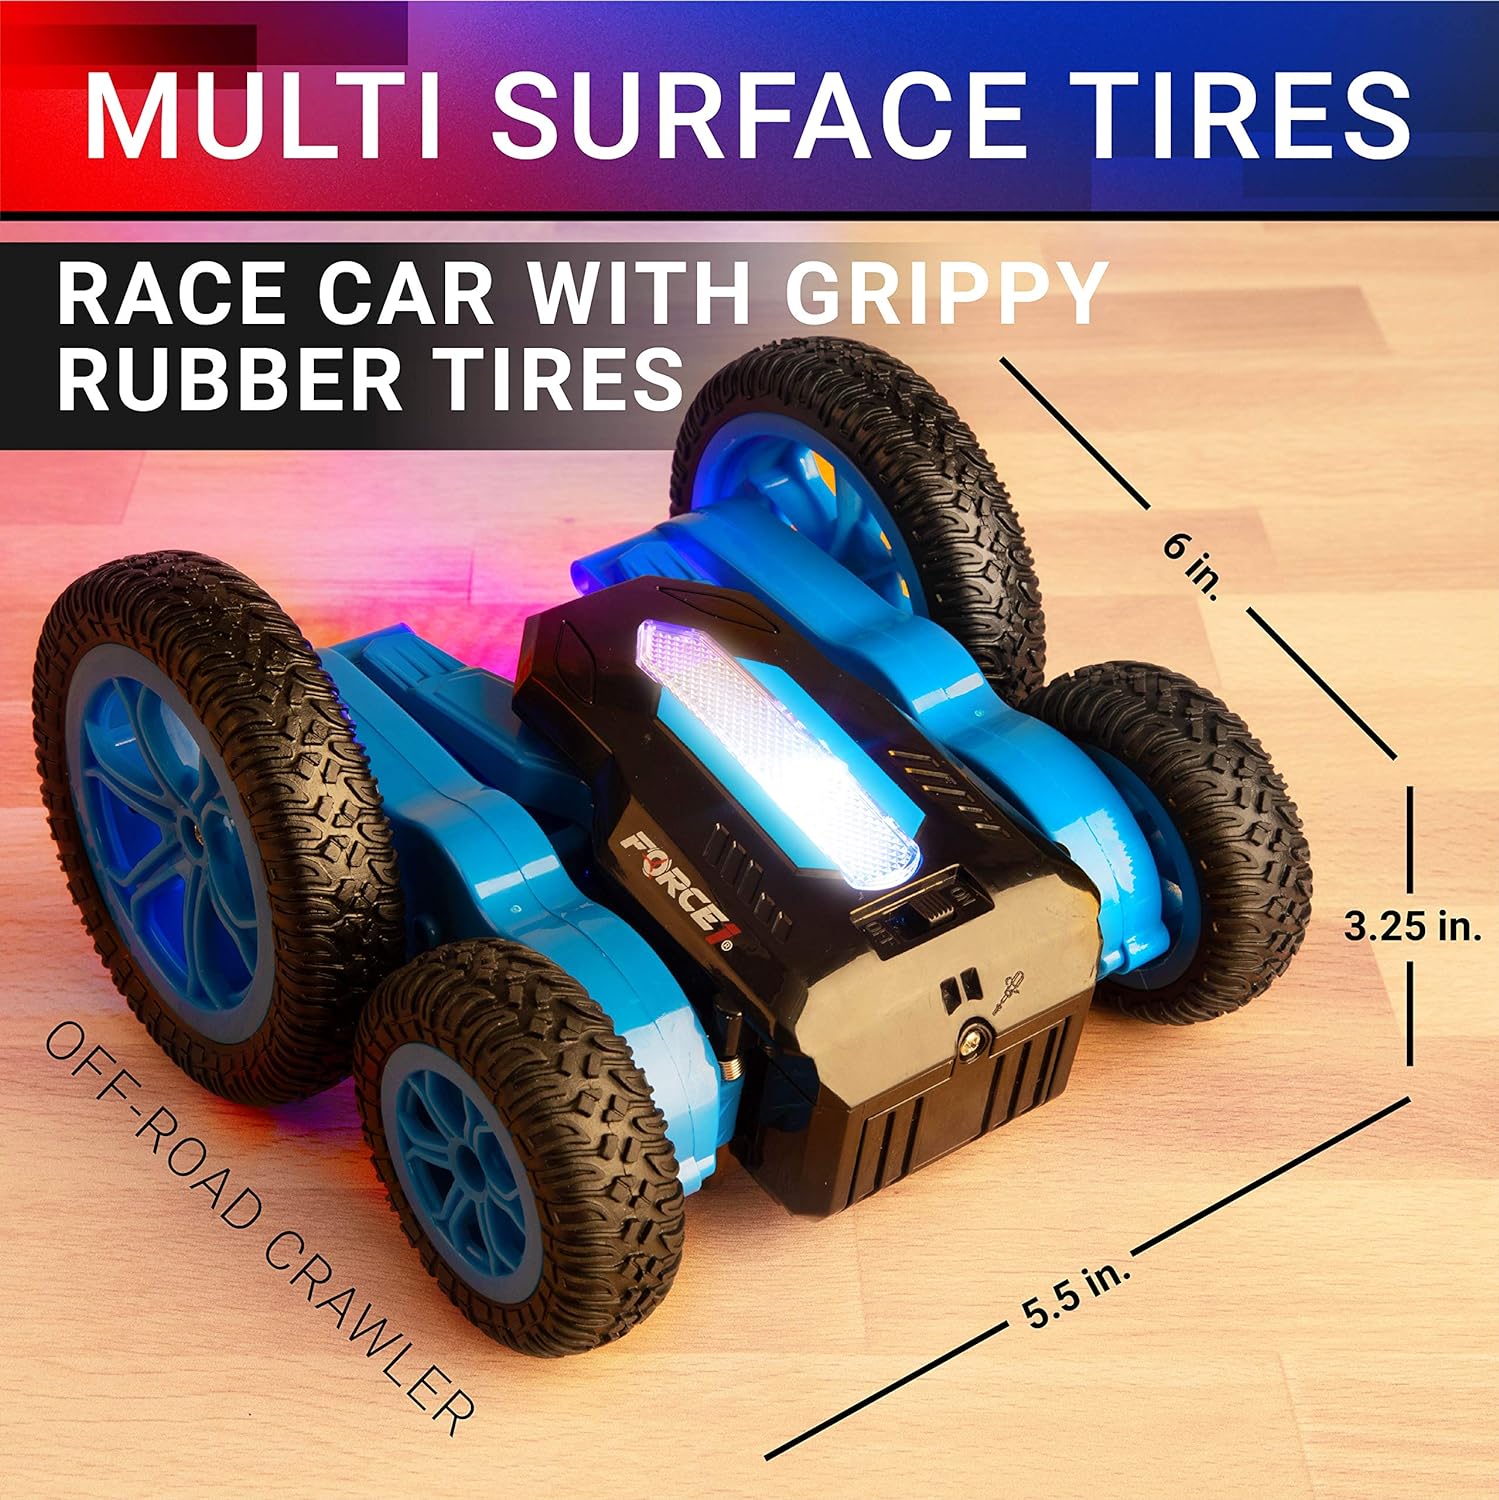 Force1 Tornado LED Remote Control Car for Kids - Double Sided Fast RC Car, 4WD Off-Road Stunt Car with 360 Flips, All Terrain Tires, LEDs, Rechargeable Toy Car Batteries, and Easy Remote